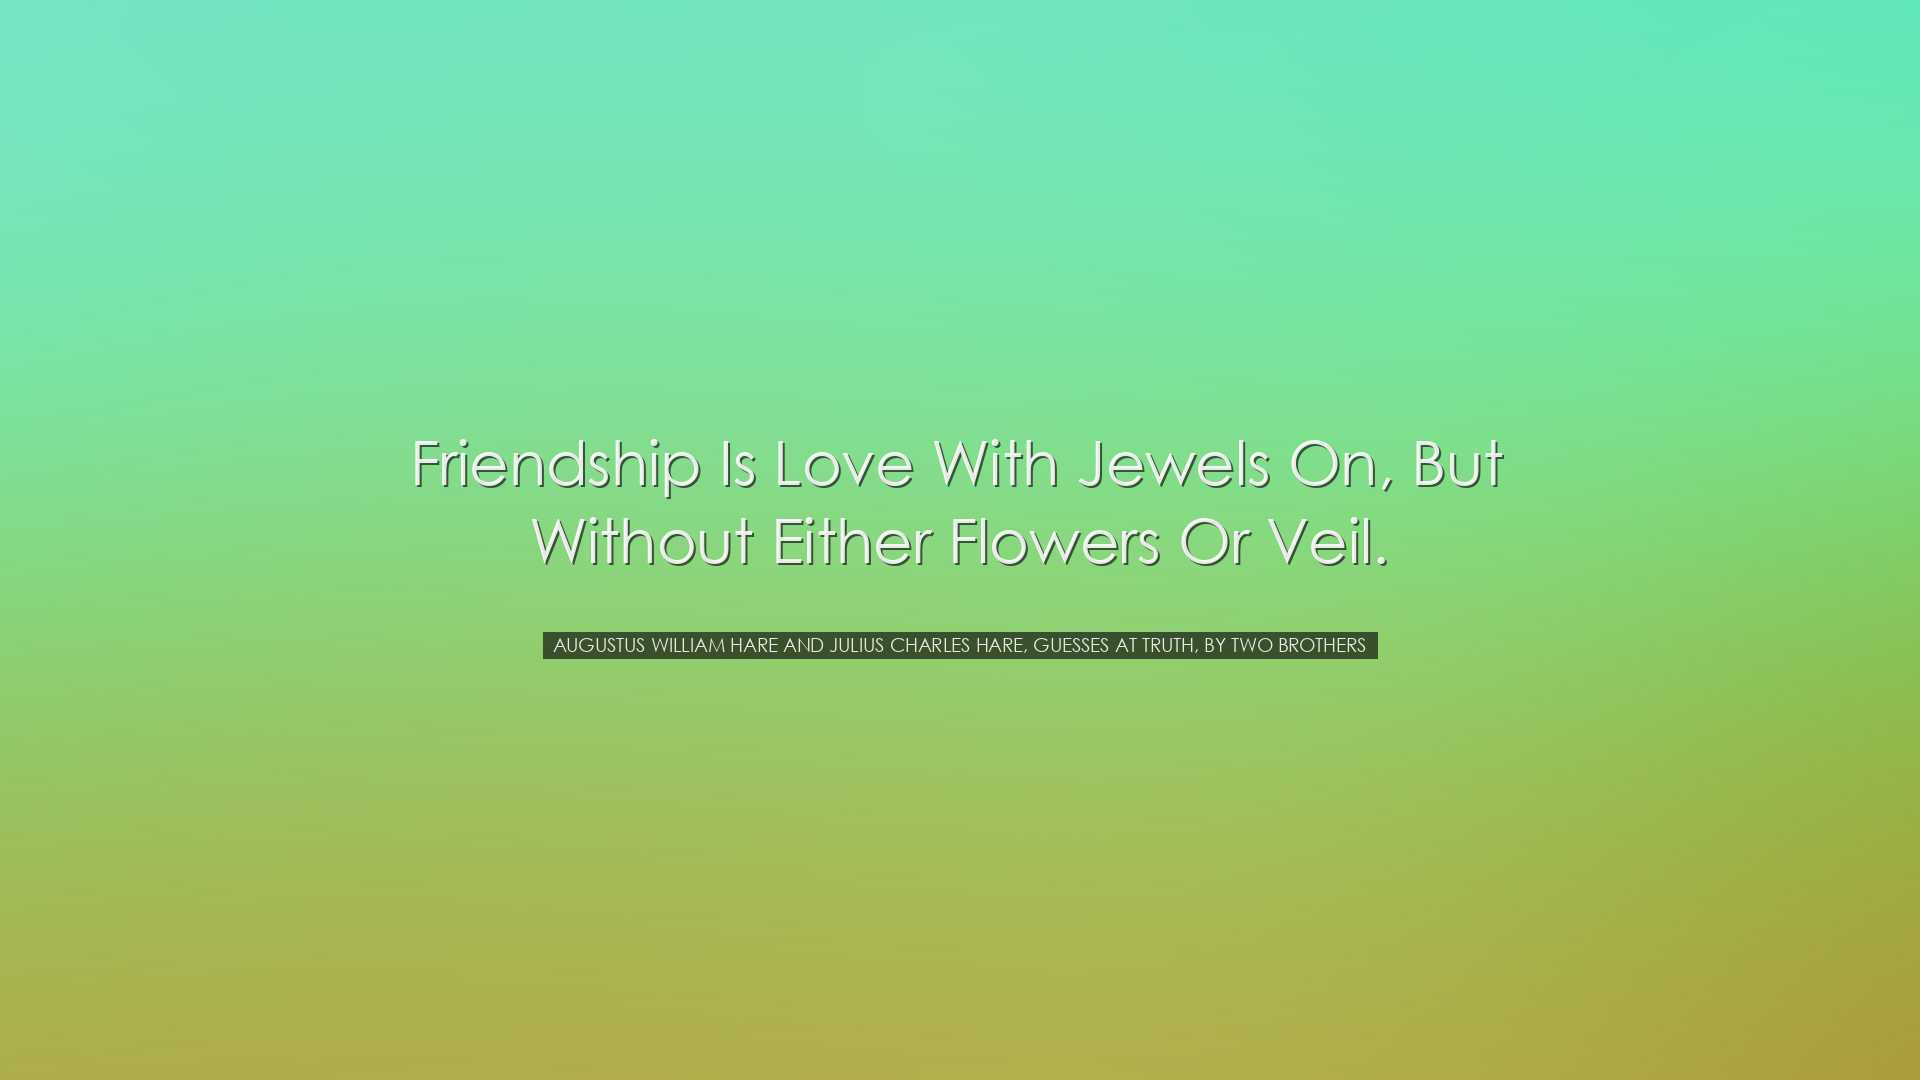 Friendship is Love with jewels on, but without either flowers or v